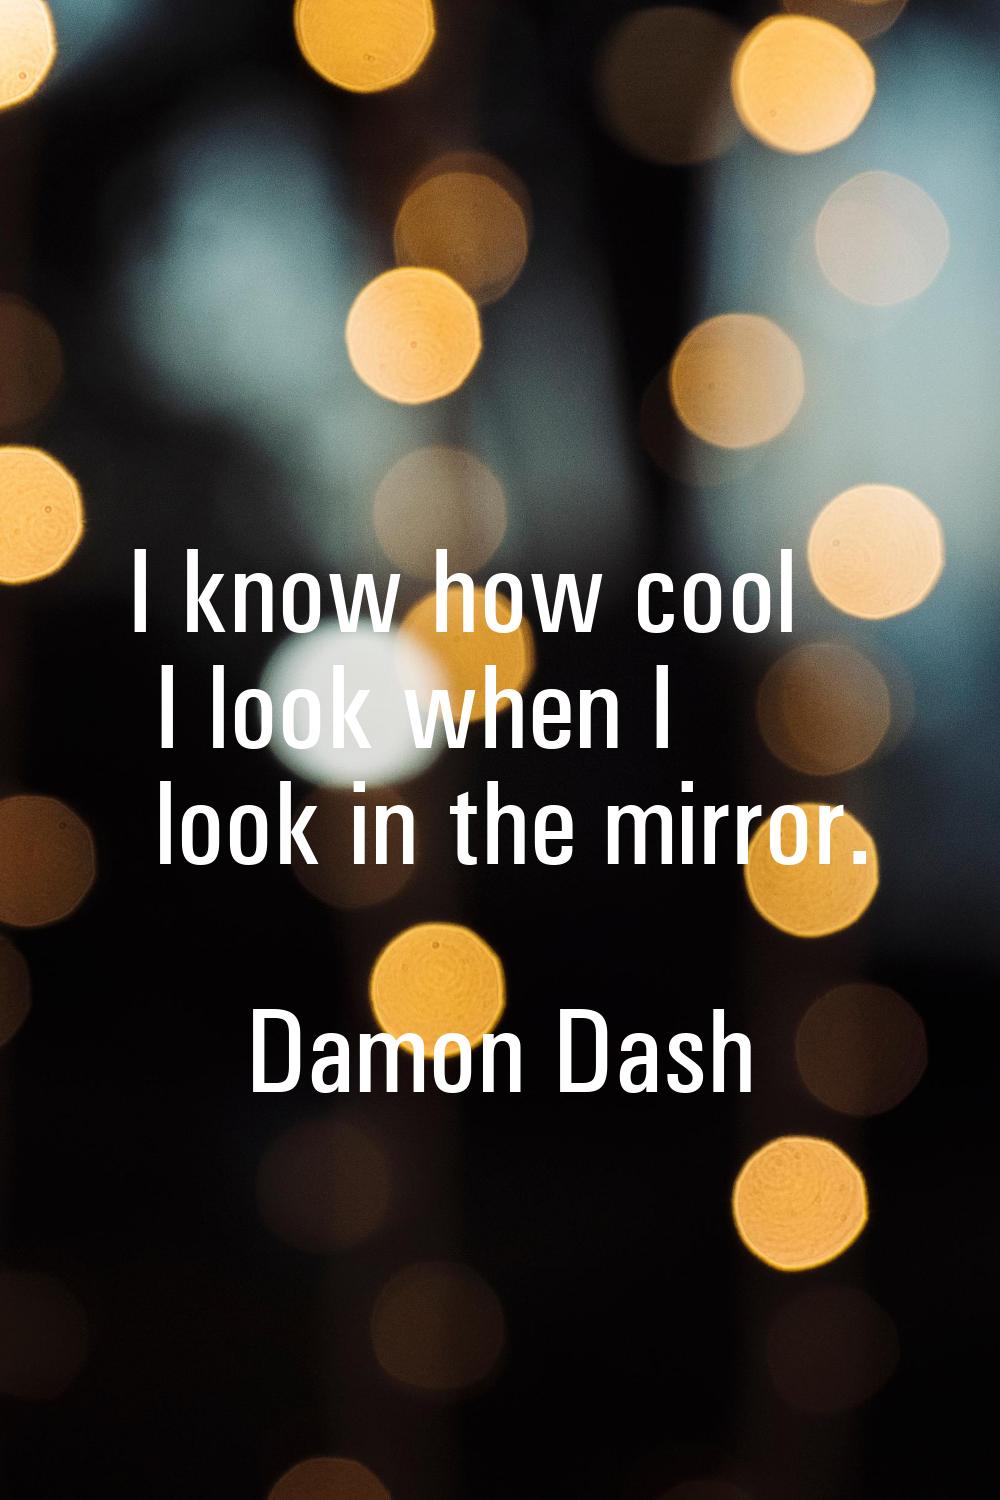 I know how cool I look when I look in the mirror.